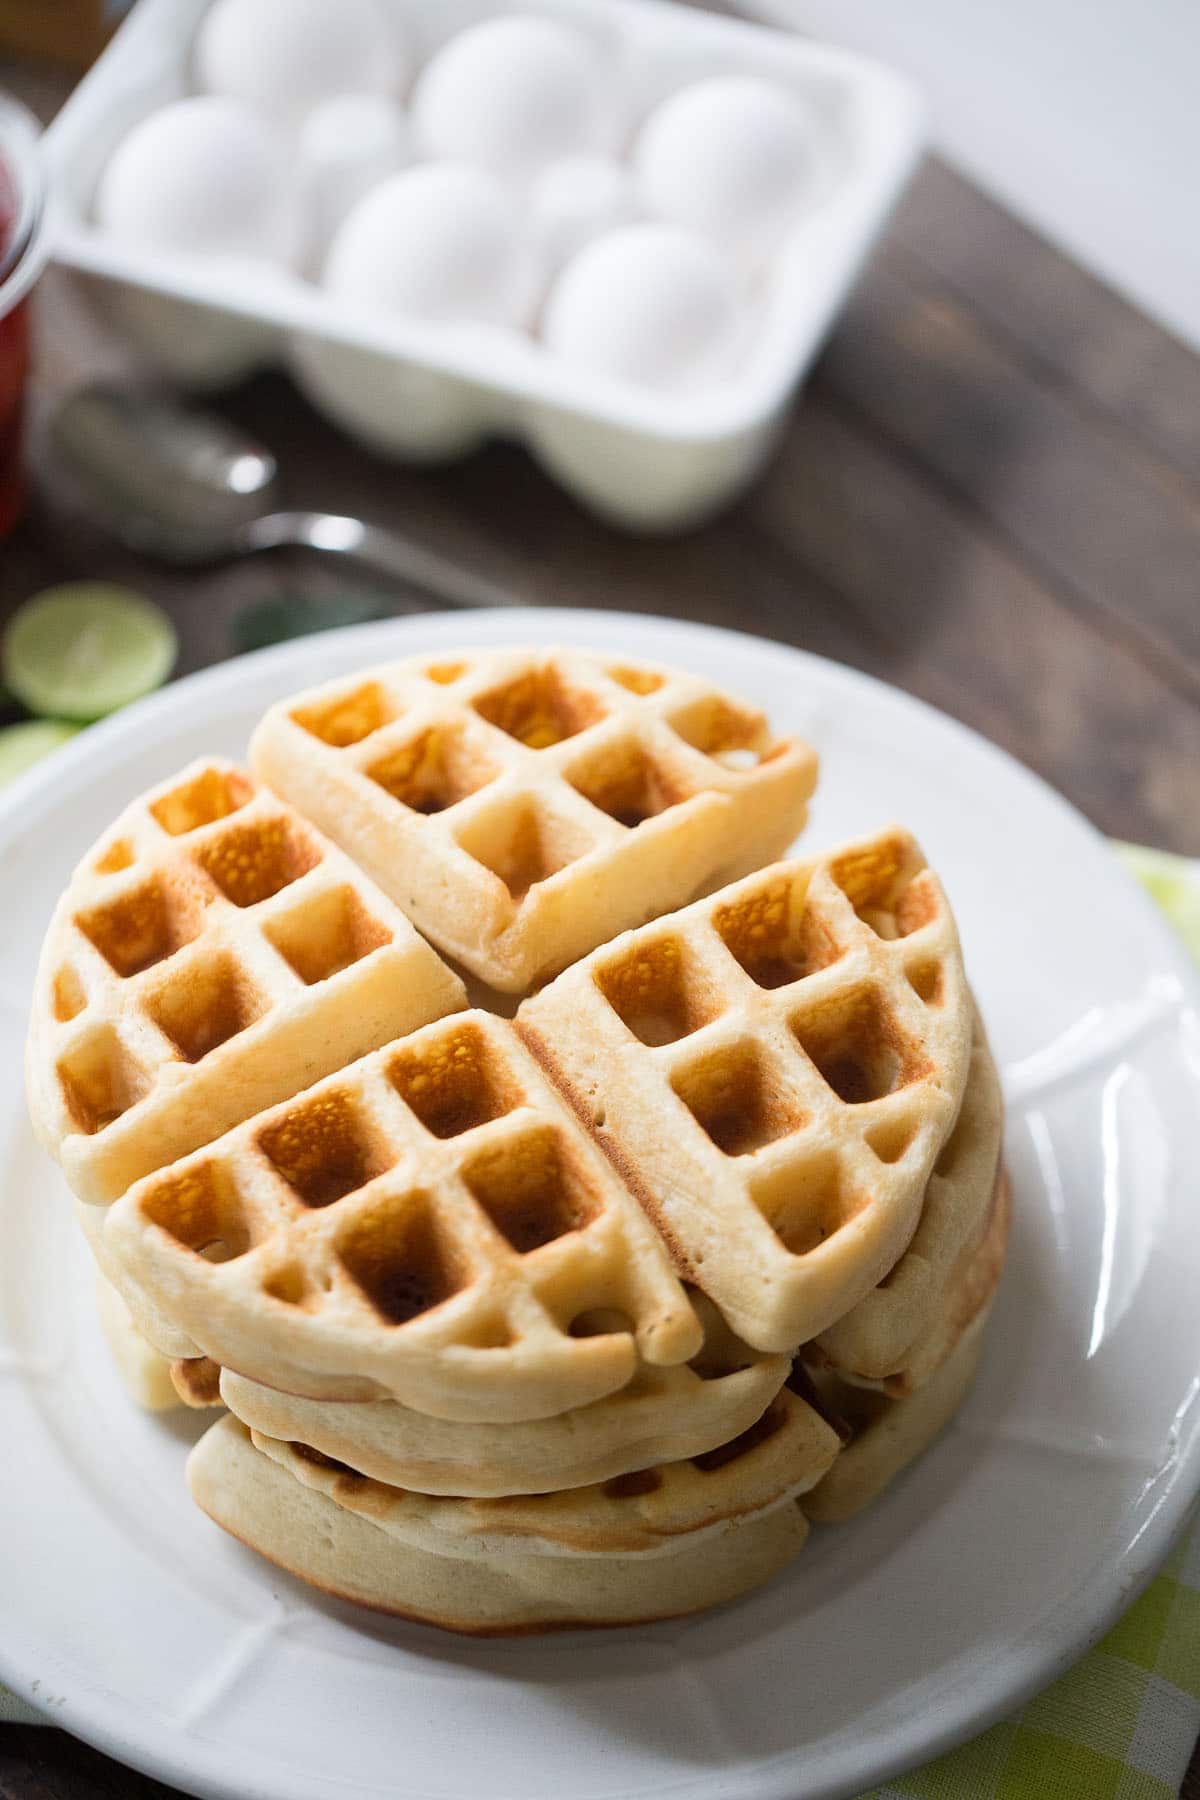 Homemade Belgian waffle recipe that is perfect for summer; fresh key lime flavor and sweet strawberries make this breakfast unbelievable!